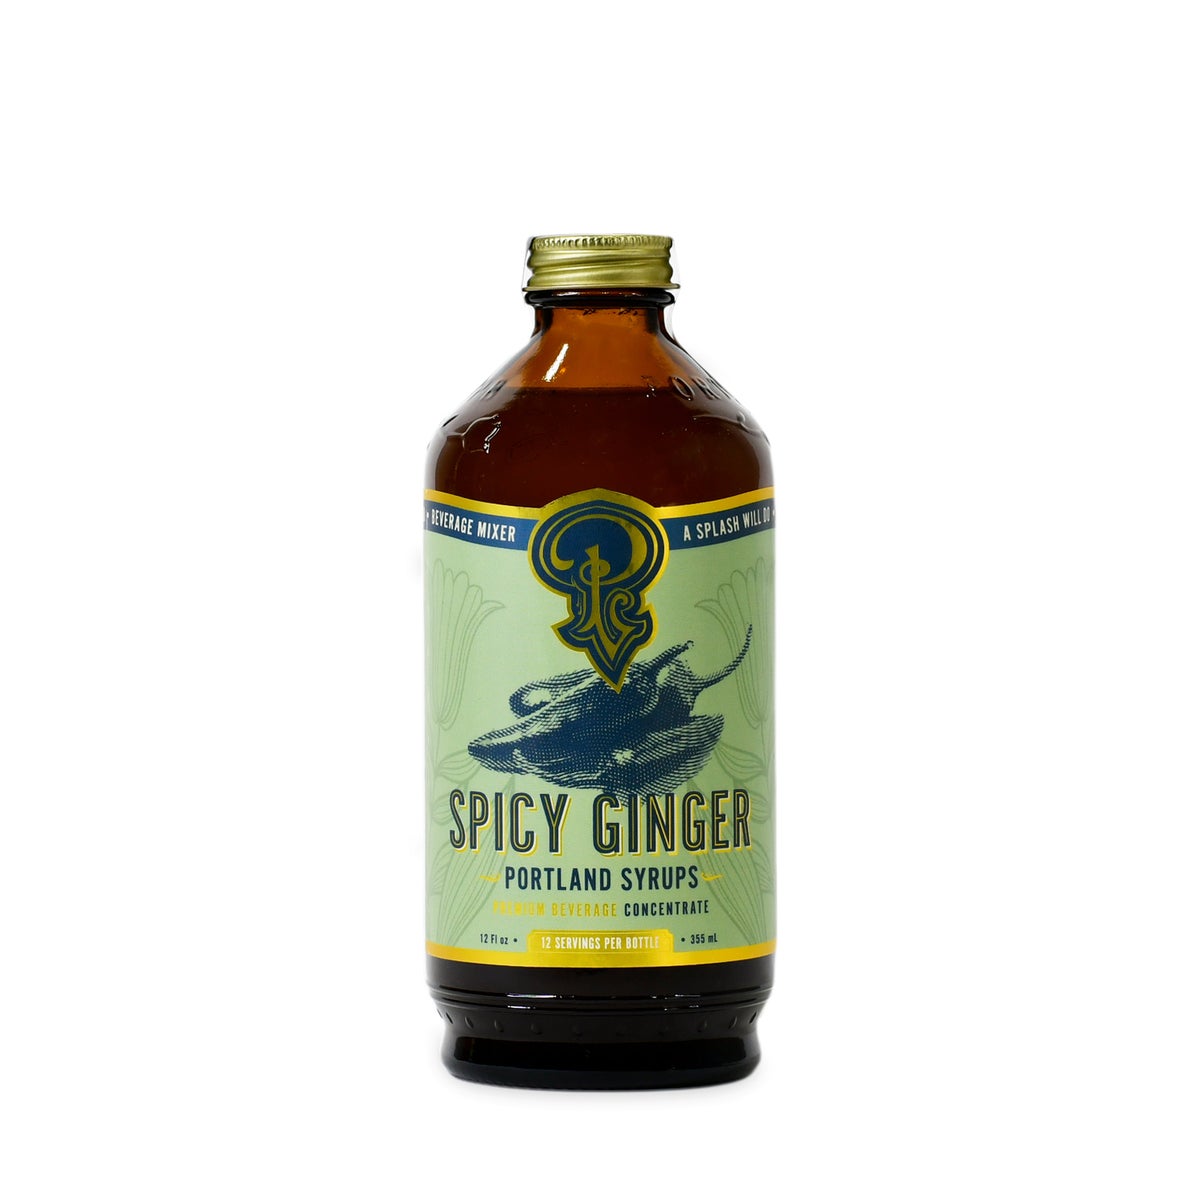 PORTLAND SYRUPS - SPICY GINGER SYRUP